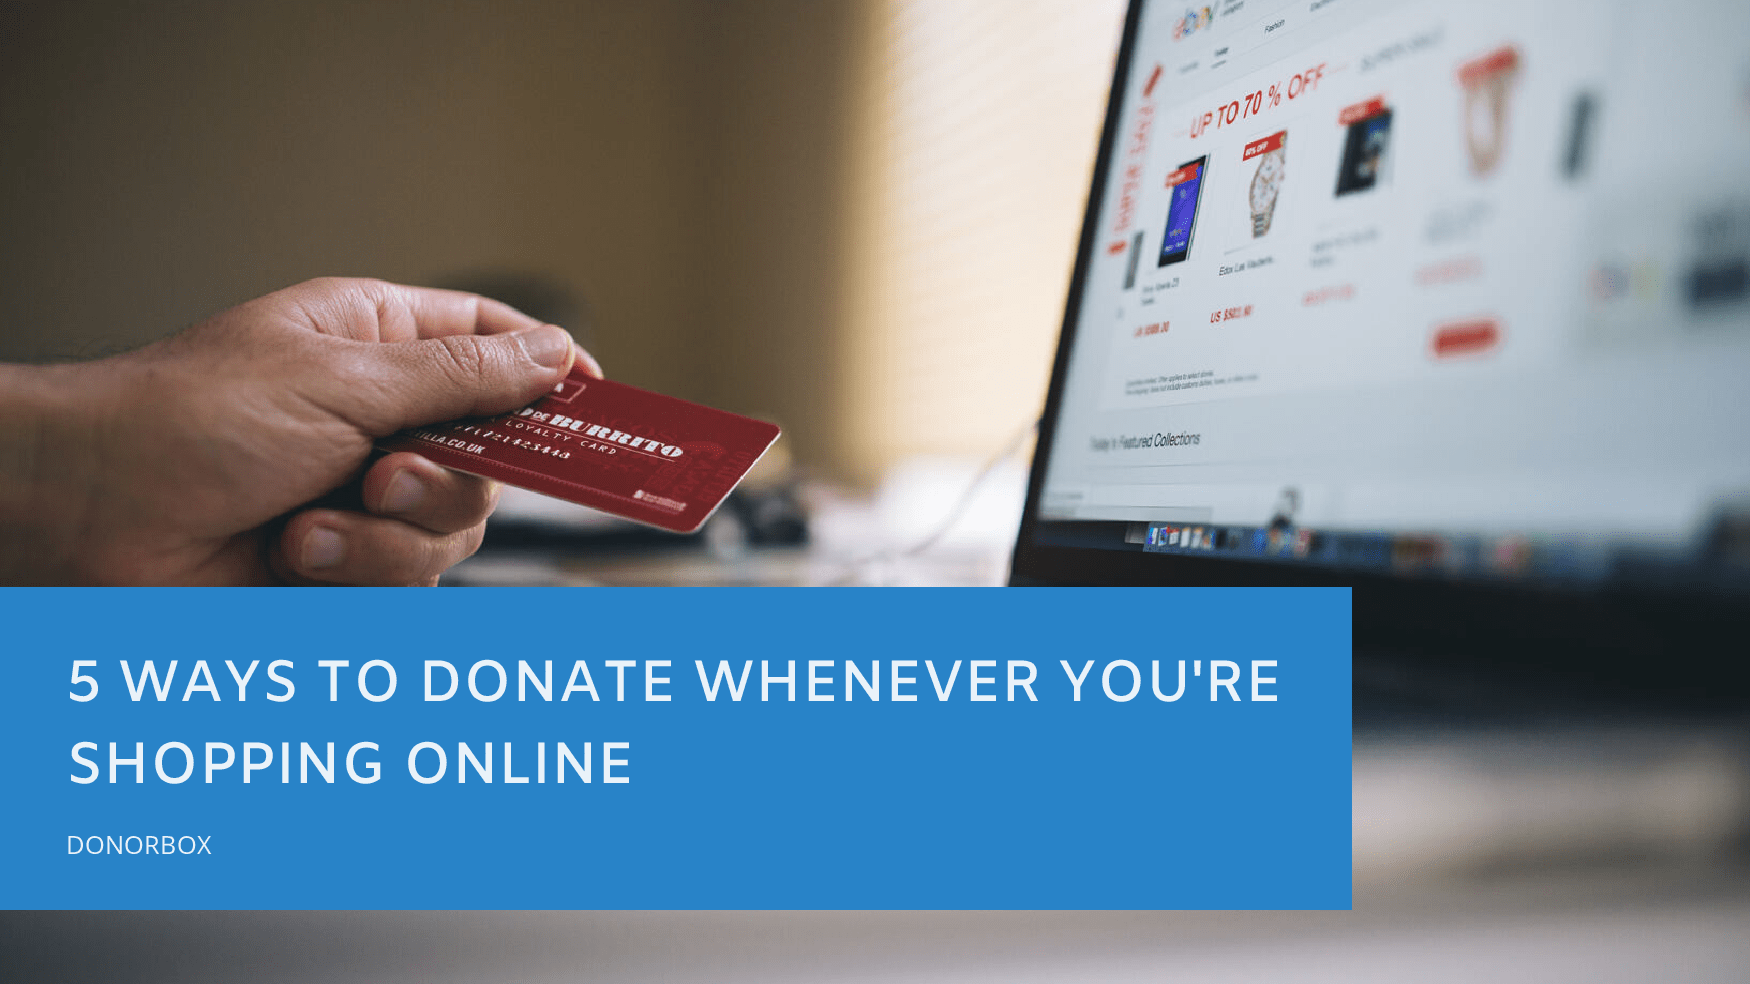 5 Ways to Donate Whenever You’re Shopping Online